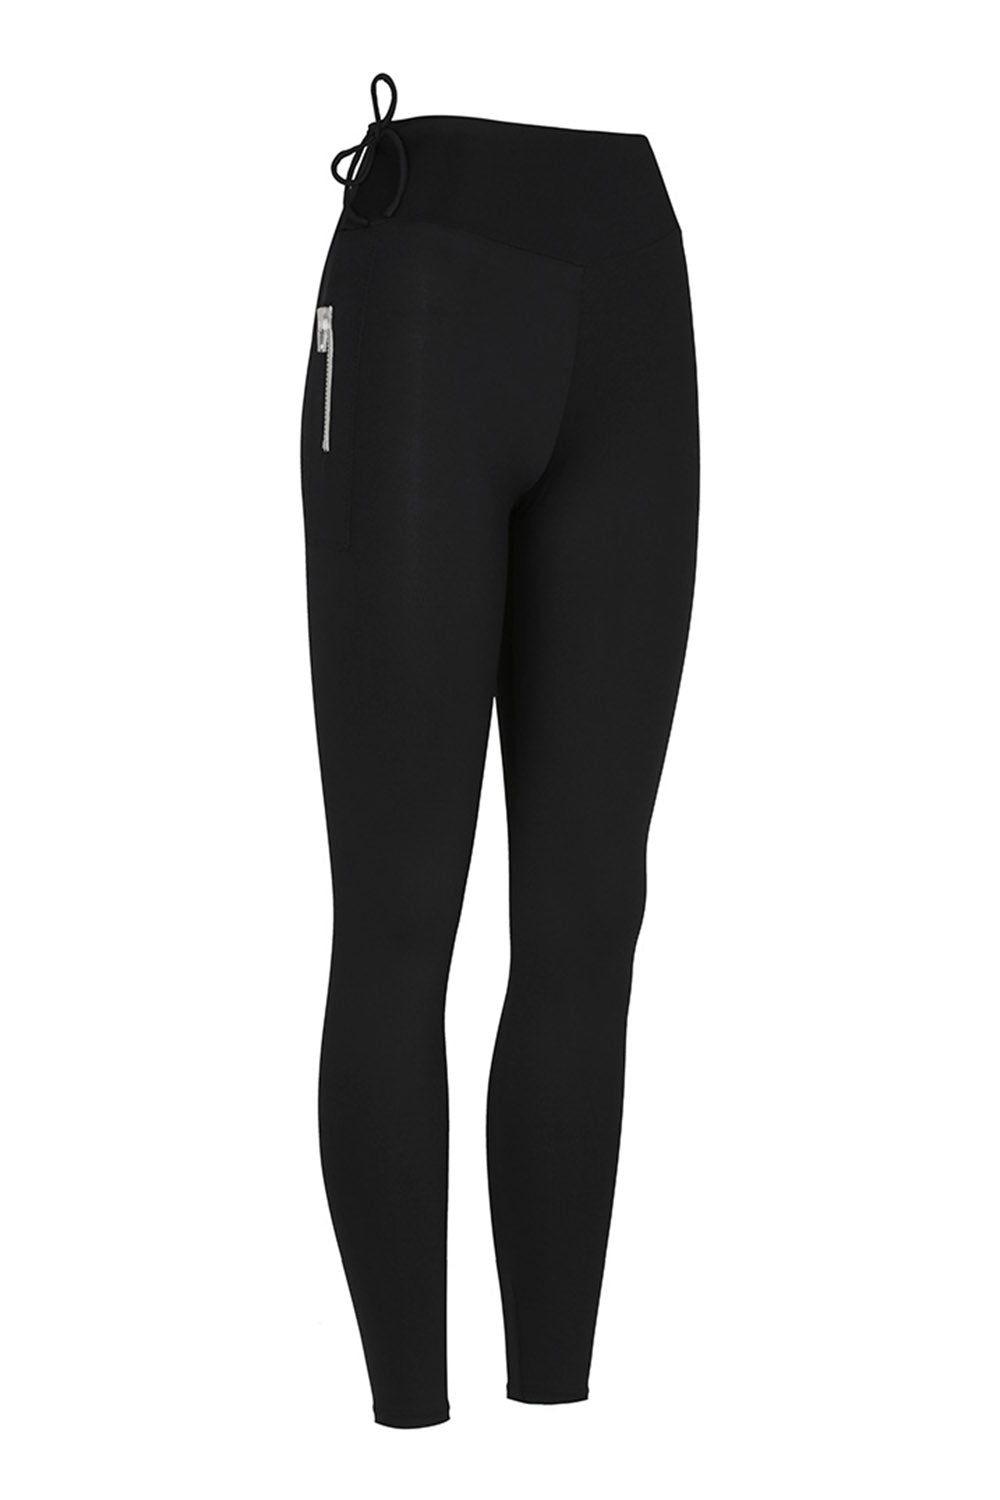 Dkoko High Waisted Surf Legging with UV Protection